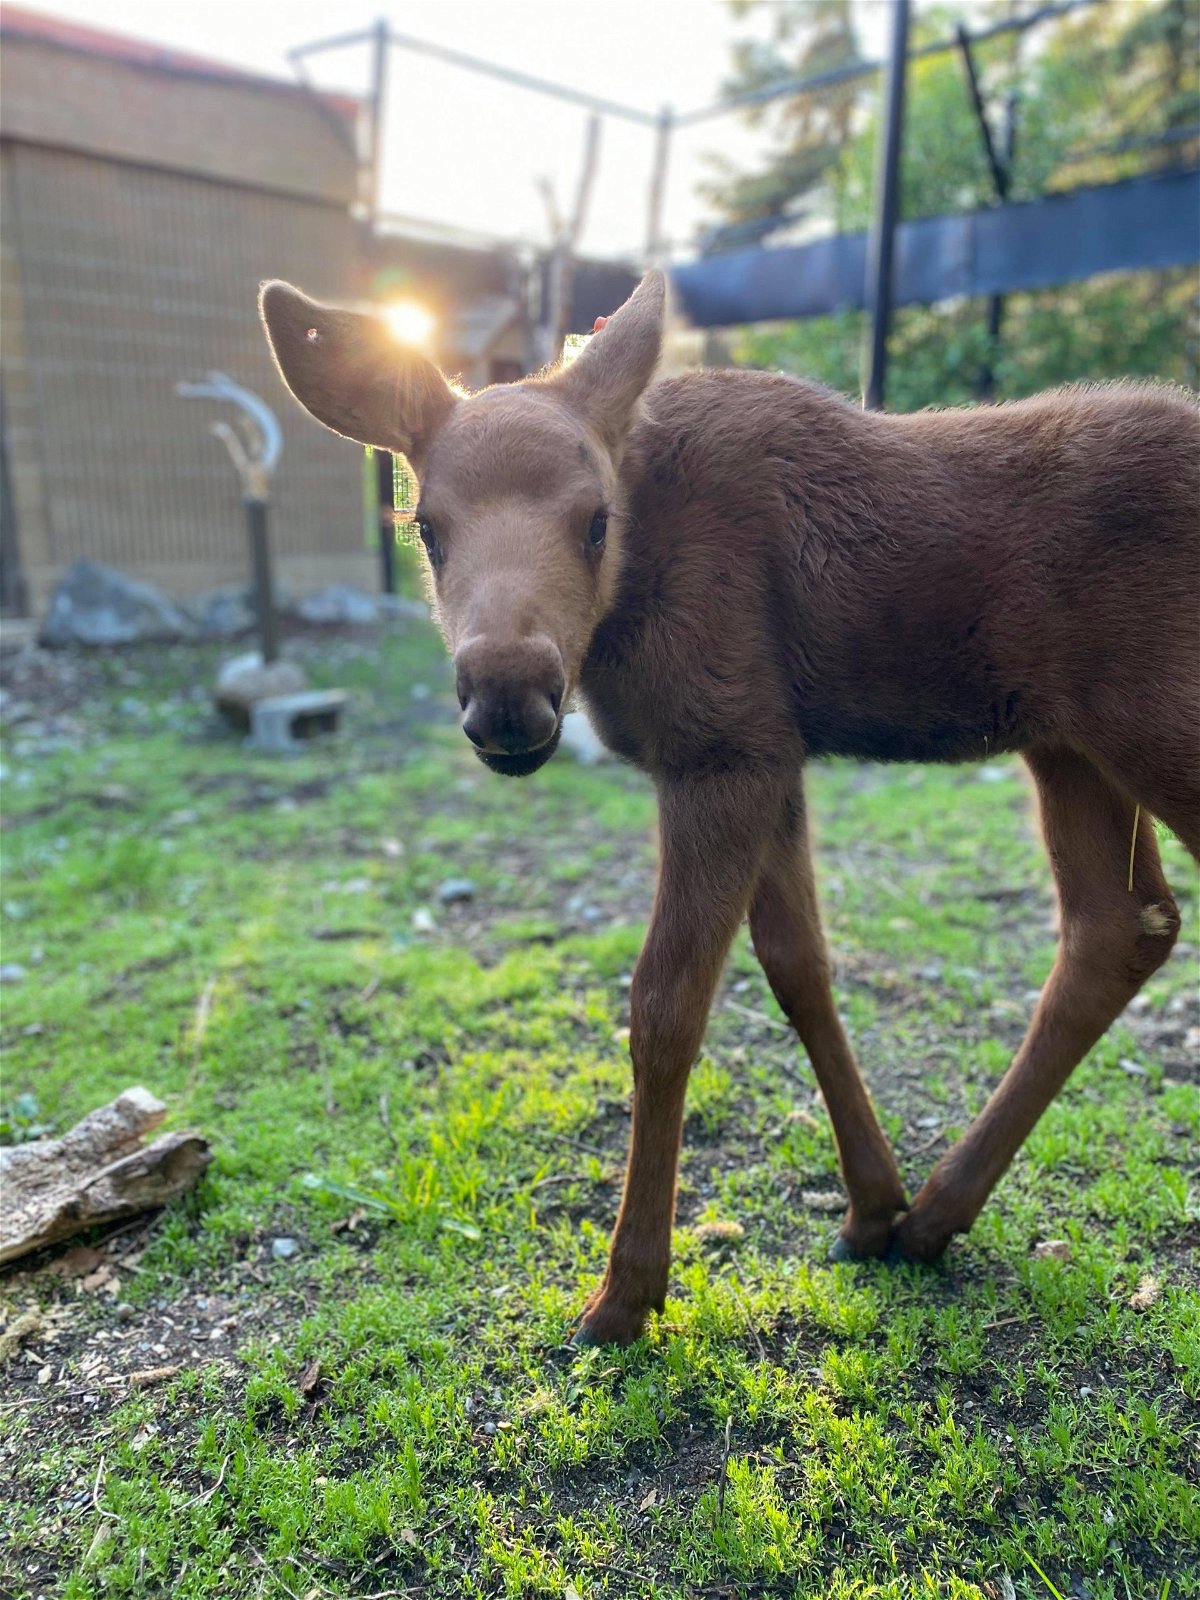 Orphaned Baby Alaska Moose To Find A Home In Cheyenne Mountain Zoo Krdo